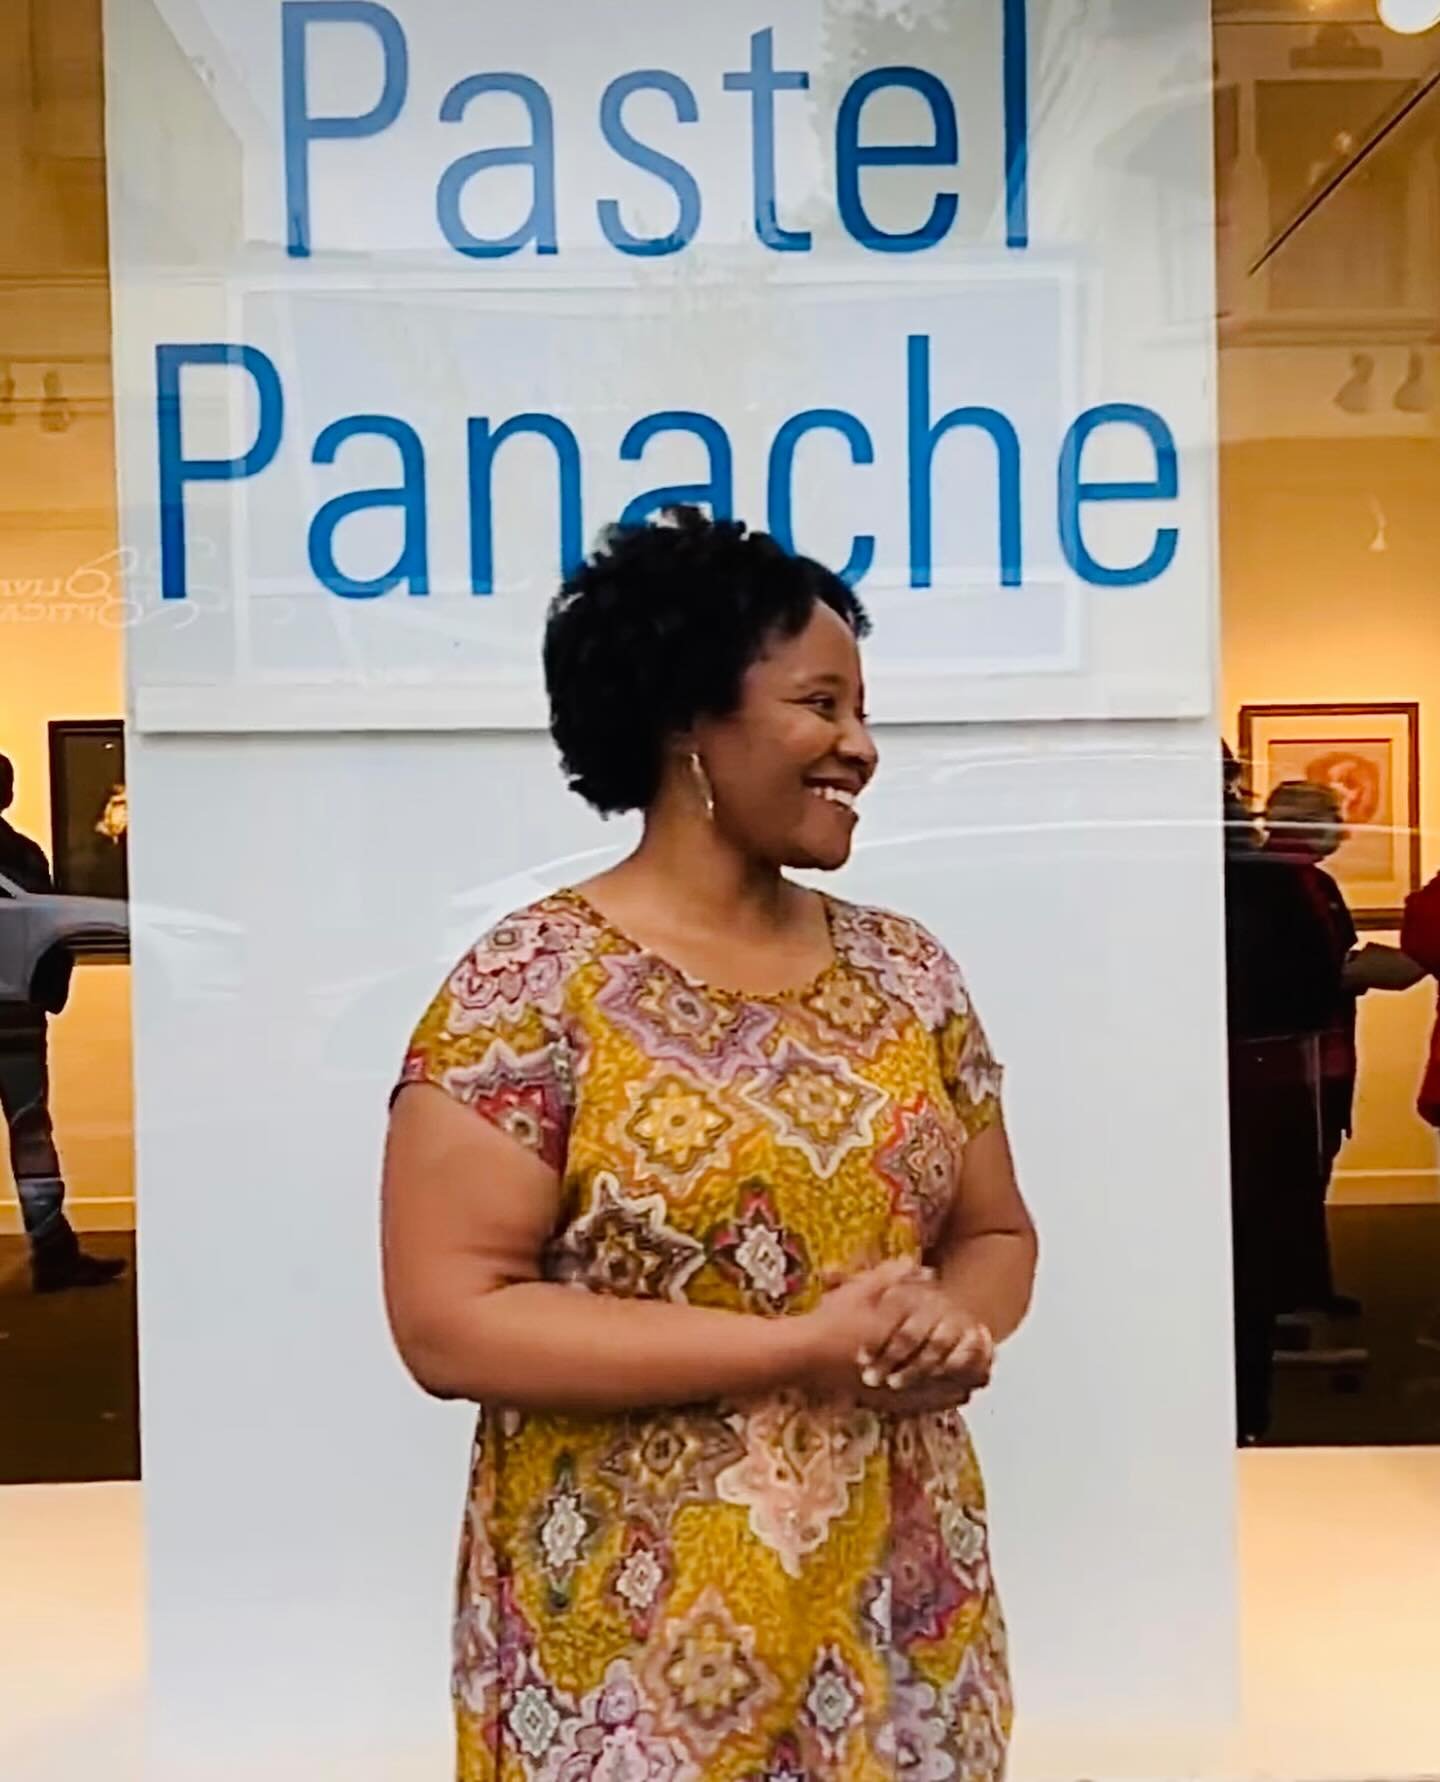 Congratulations to Art Bias artist Shari Bryant for her work &ldquo;Horns&rdquo; being included in the exhibition &ldquo;Pastel Panache&rdquo; at Art Works Downtown in San Rafael.

Now through May 25, 2024, &ldquo;Pastel Panache&rdquo; at Art Works D